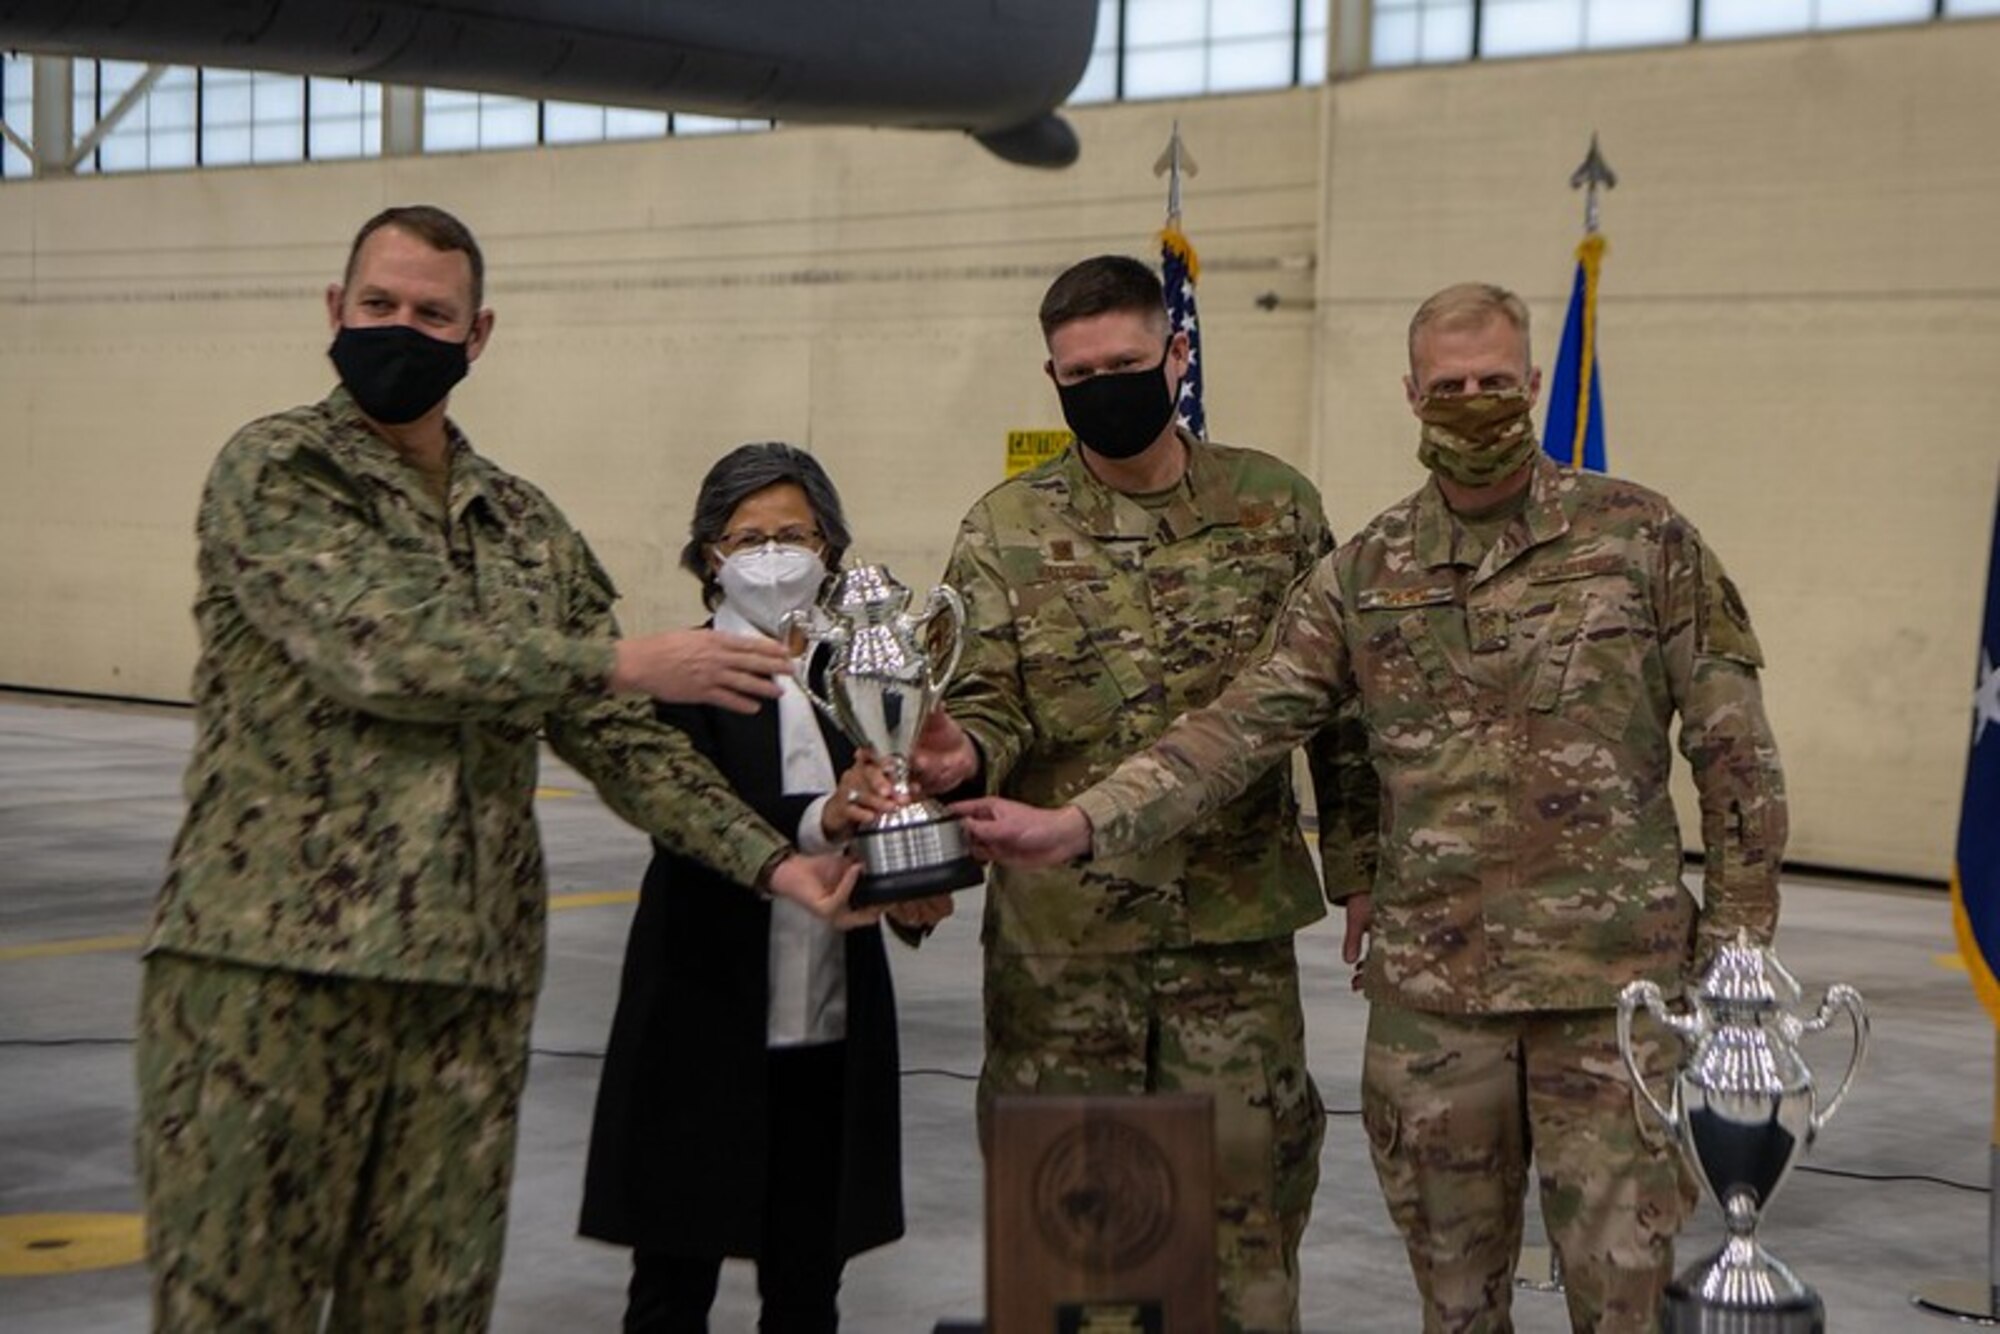 The Omaha trophy is presented to the 5th Bomb Wing Dec. 15, 2020, at Minot Air Force Base, North Dakota. Rear Adm. William W. Wheeler III, U.S. Strategic Command Chief of Staff, visited Team Minot to present the Omaha Trophy to both the 91st Missile Wing and the 5th Bomb Wing. (U.S. Air Force photo by Airman 1st Class Jesse Jenny)